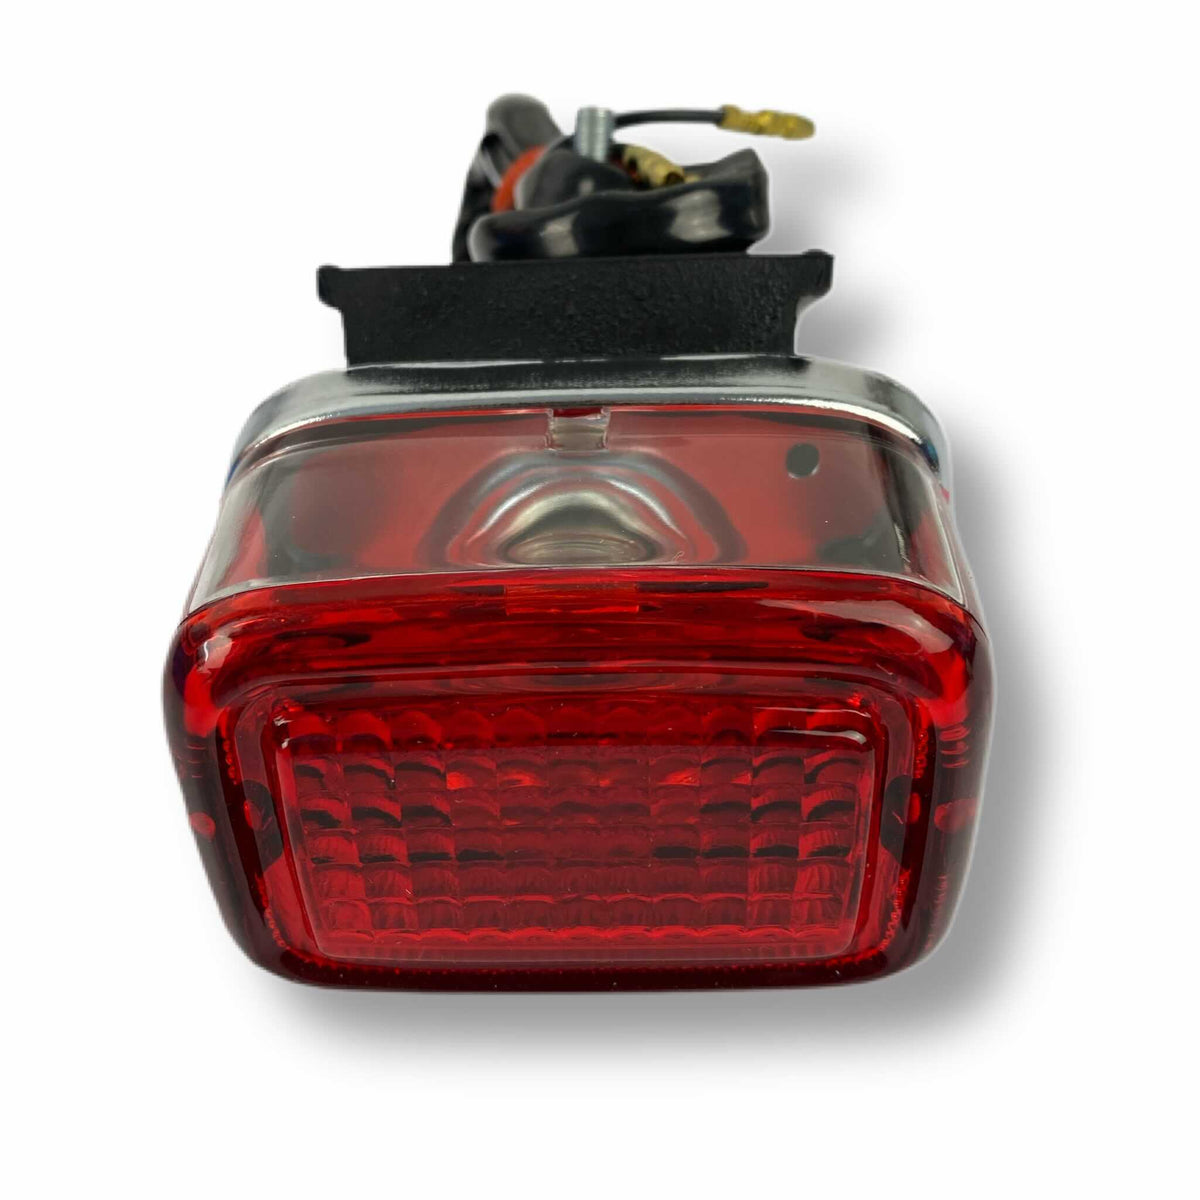 Scooter Motorcycle Trials Small Rectangle Rear Light